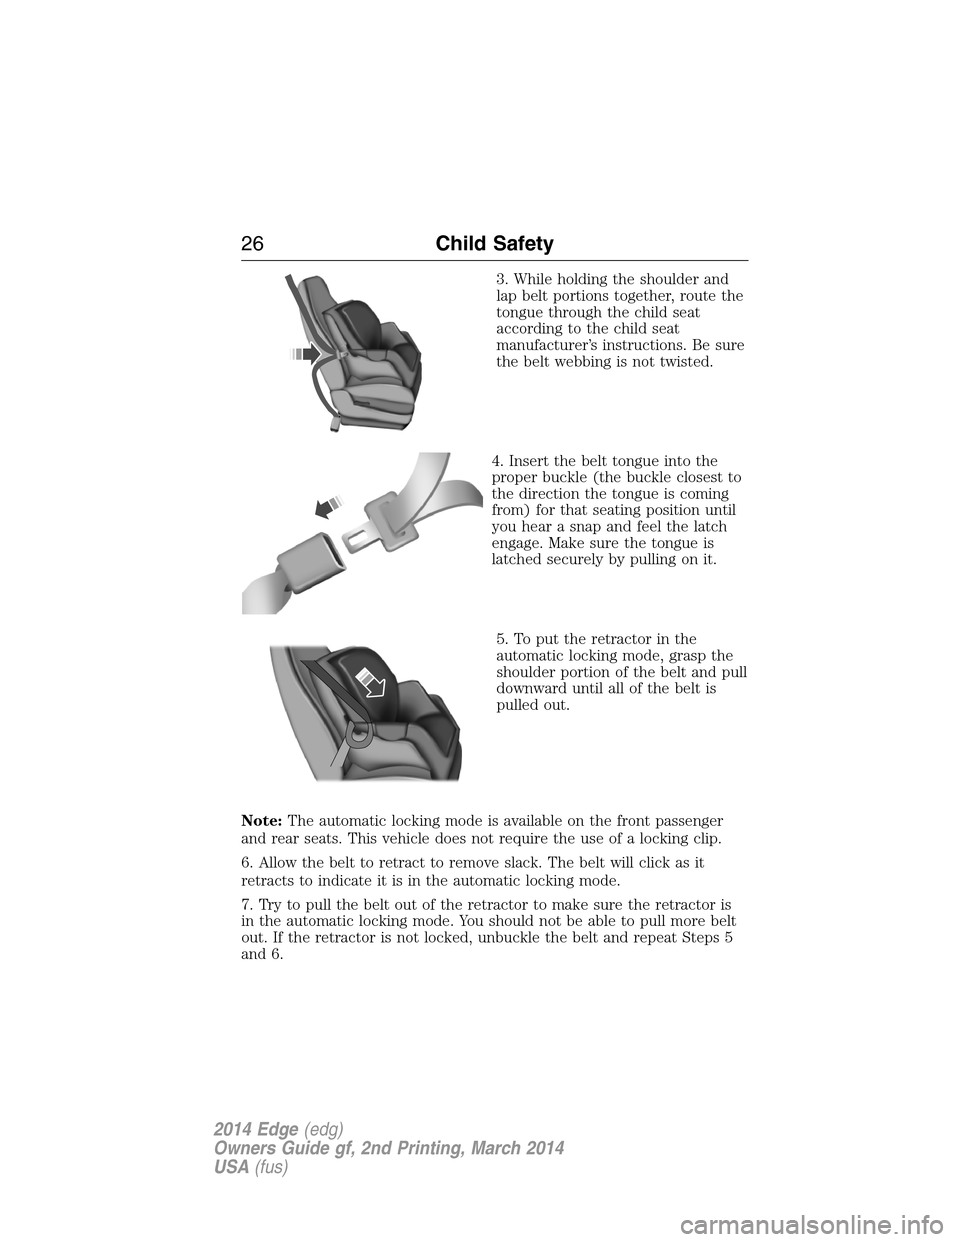 FORD EDGE 2014 1.G Owners Manual 3. While holding the shoulder and
lap belt portions together, route the
tongue through the child seat
according to the child seat
manufacturer’s instructions. Be sure
the belt webbing is not twisted